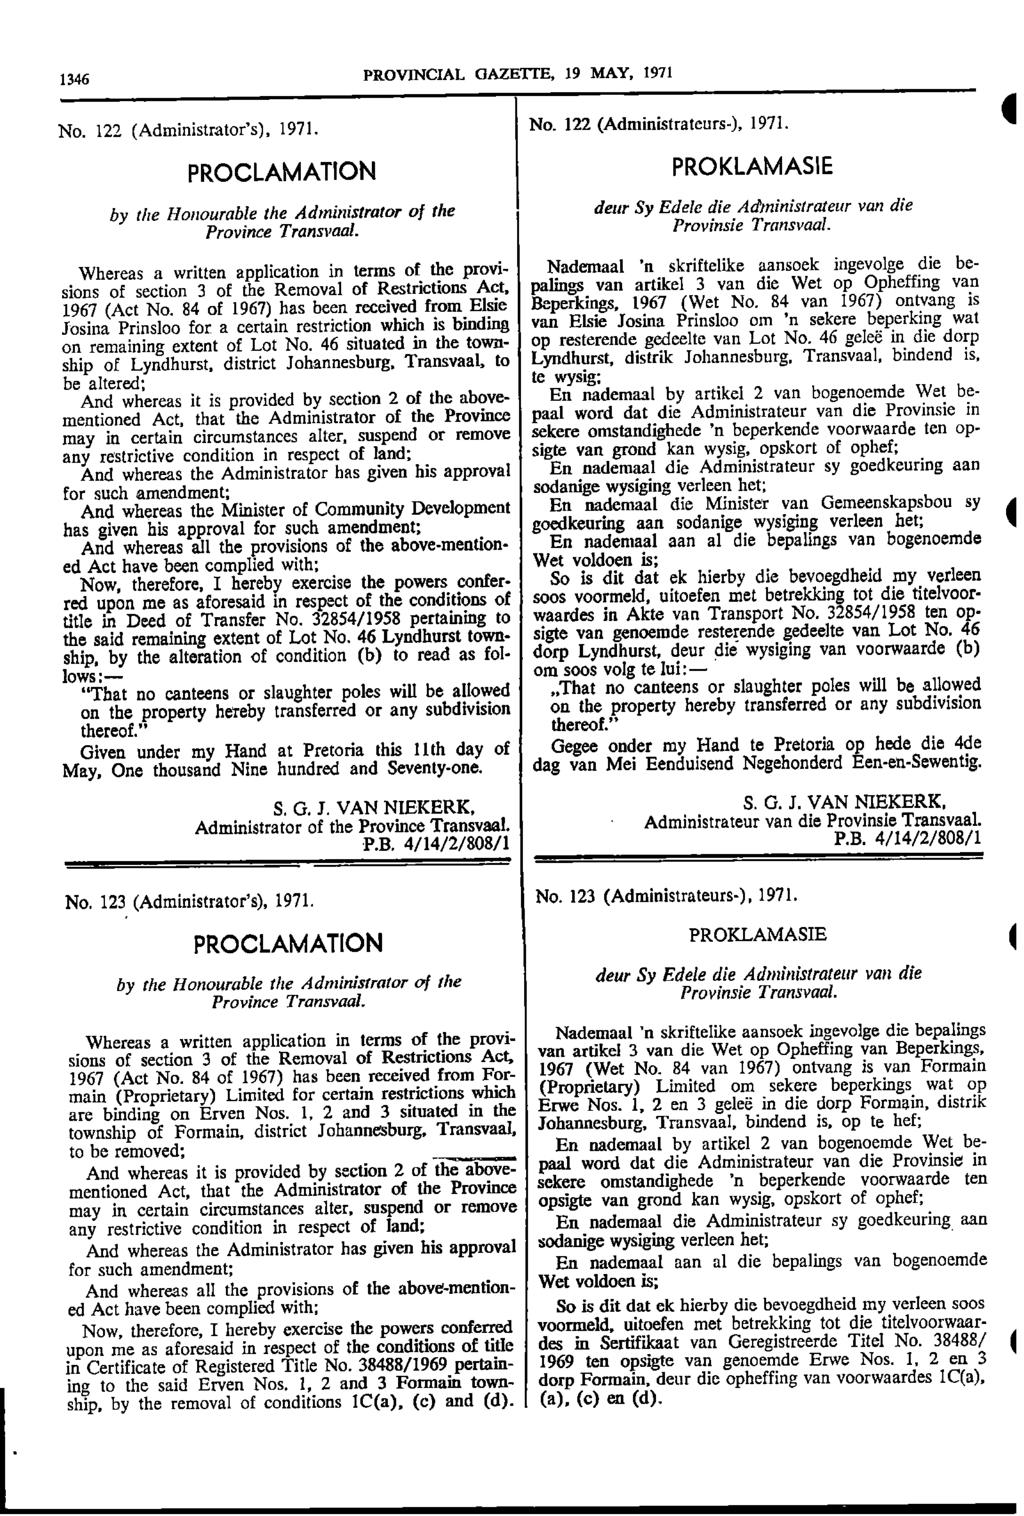 1 1346 PROVINCIAL GAZETTE 19 MAY 1971 No 122 (Administrators) 1971 No 122 (Administrateurs ) 1971 4 PROCLAMATION by the Honourable the Administrator of the Province Transvaal PROKLAMASIE deur Sy